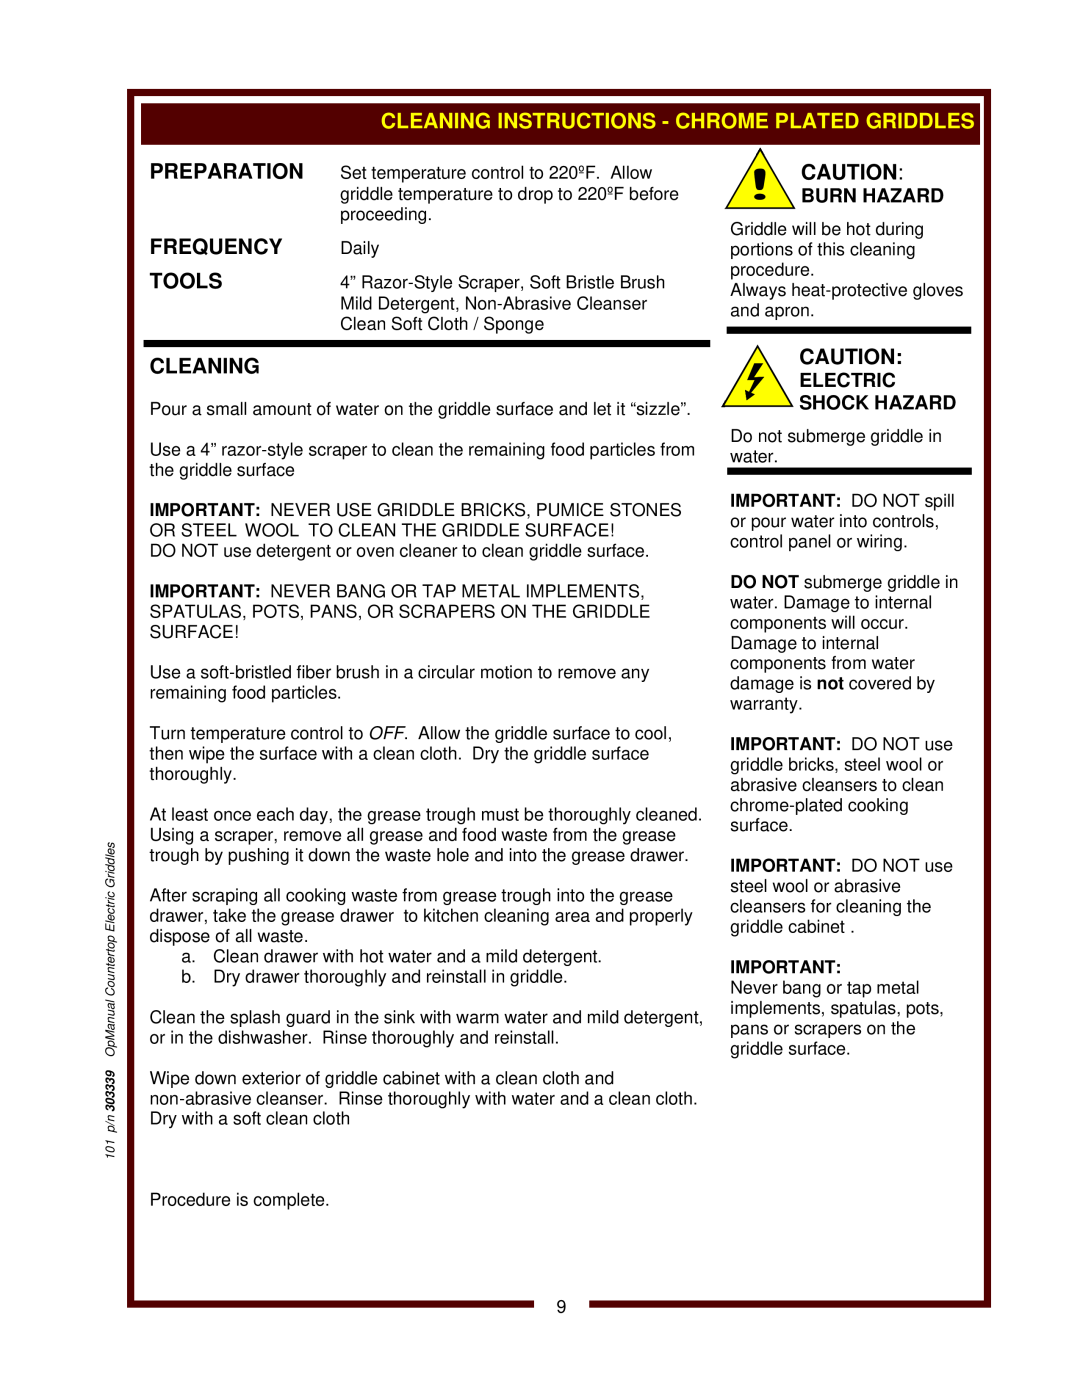 Bloomfield G-23, G60, G-24, G-13 Cleaning Instructions - Chrome Plated Griddles, Preparation, Frequency, Tools, Burn Hazard 